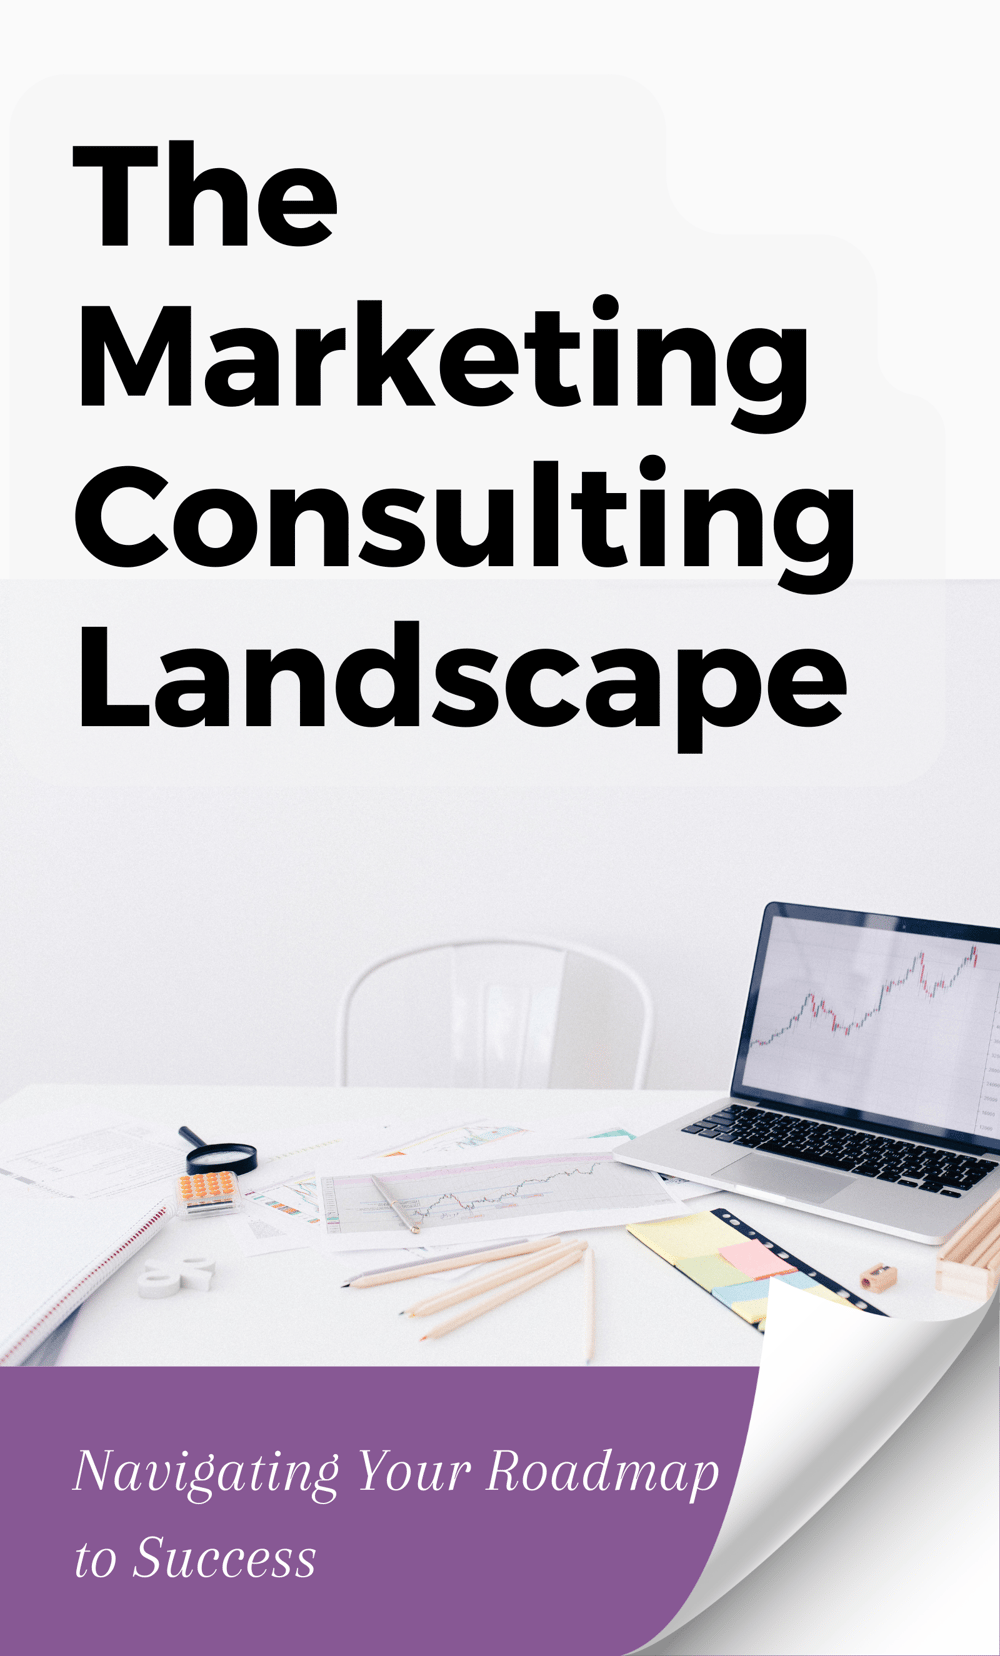 Explore data-driven, digital marketing techniques with eBook, "The Marketing Consulting Landscape: Navigating Your Roadmap to Success"